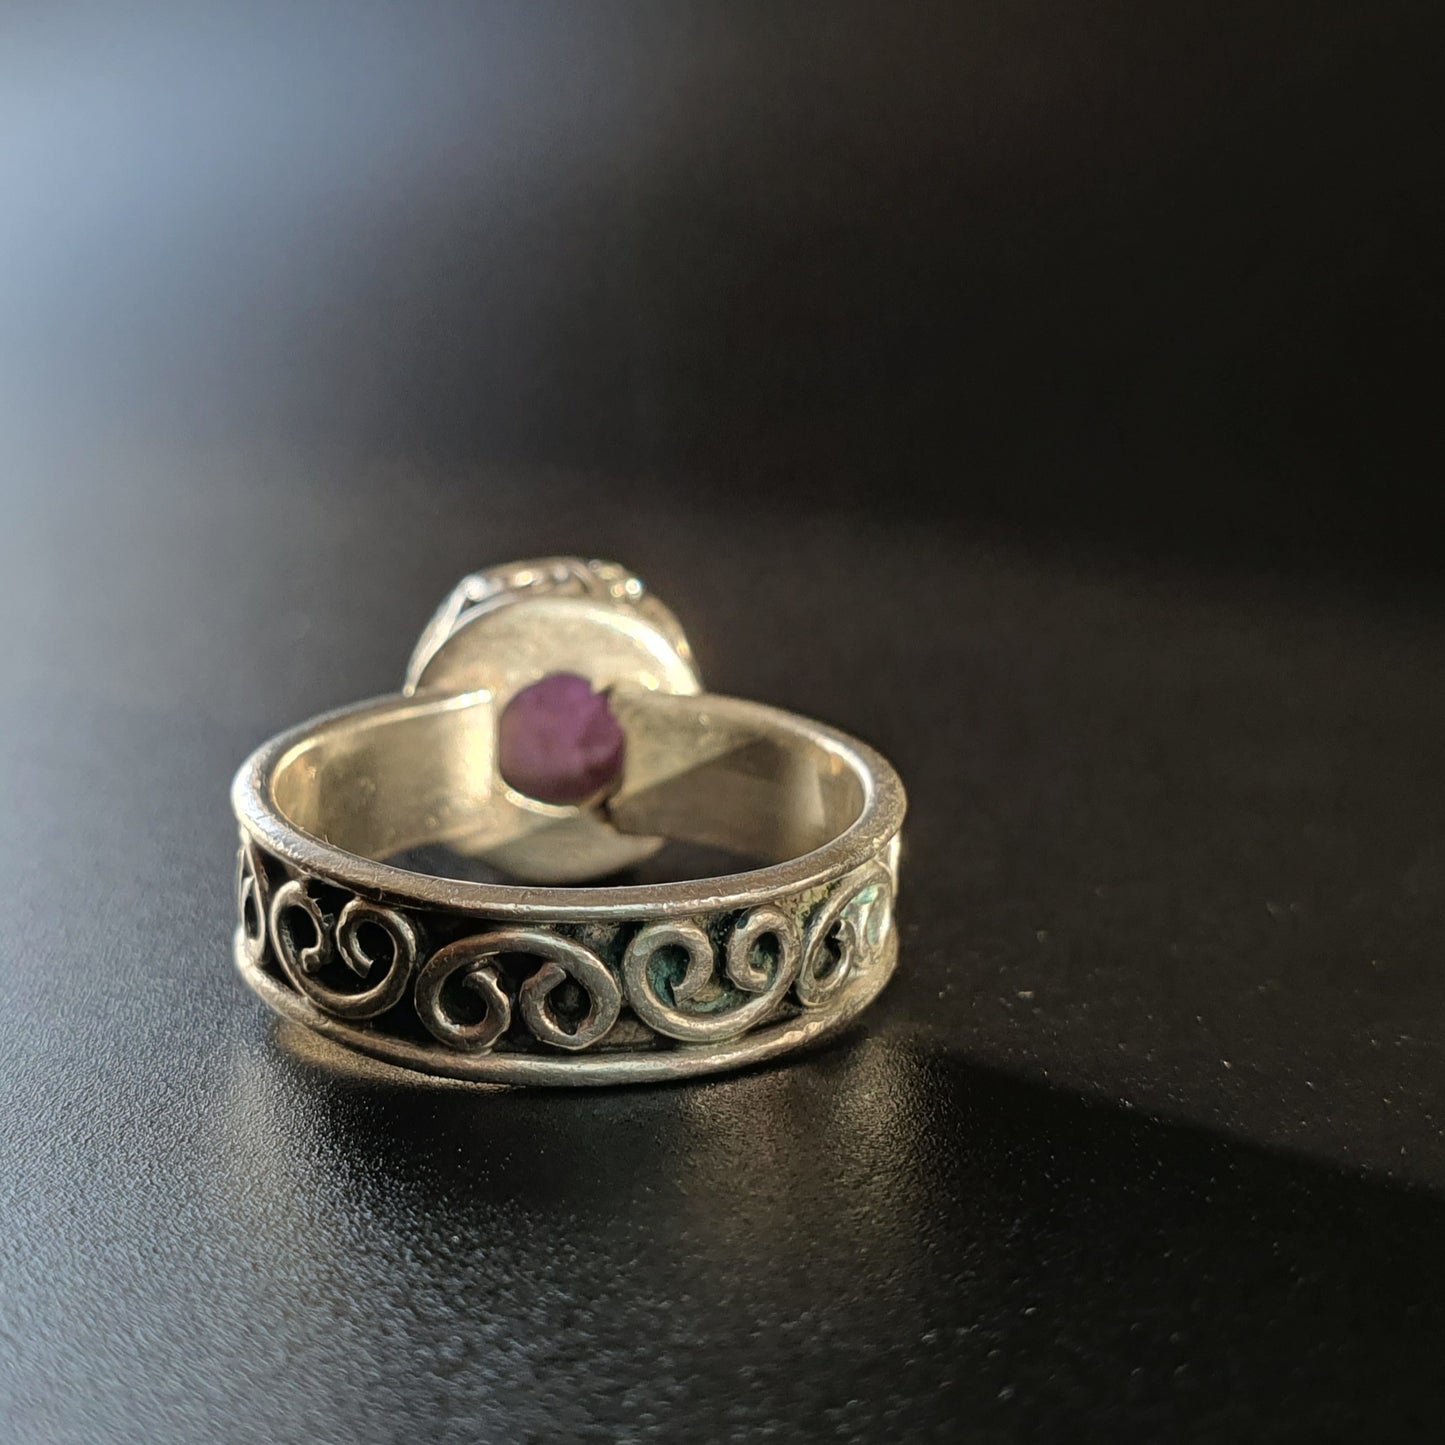 Silver ring with amethyst gemstone signed vintage handmade jewelry